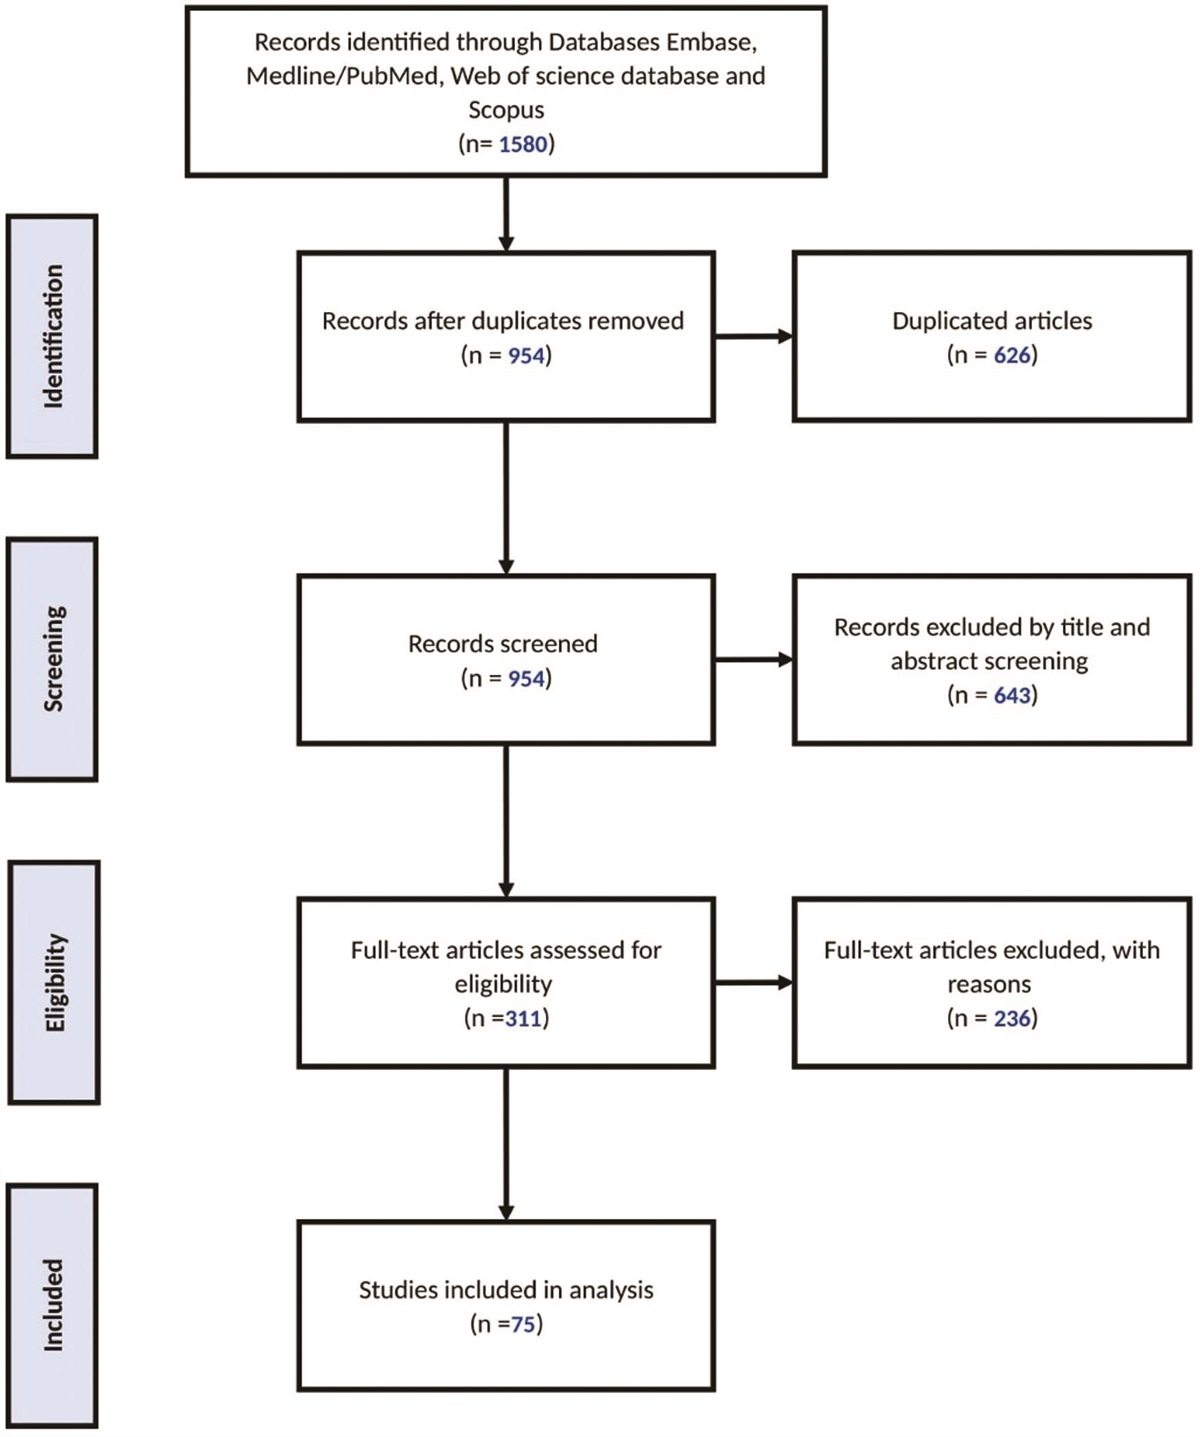 Relation between non-alcoholic fatty liver disease and carotid artery intimal media thickness as a surrogate for atherosclerosis: a systematic review and meta-analysis